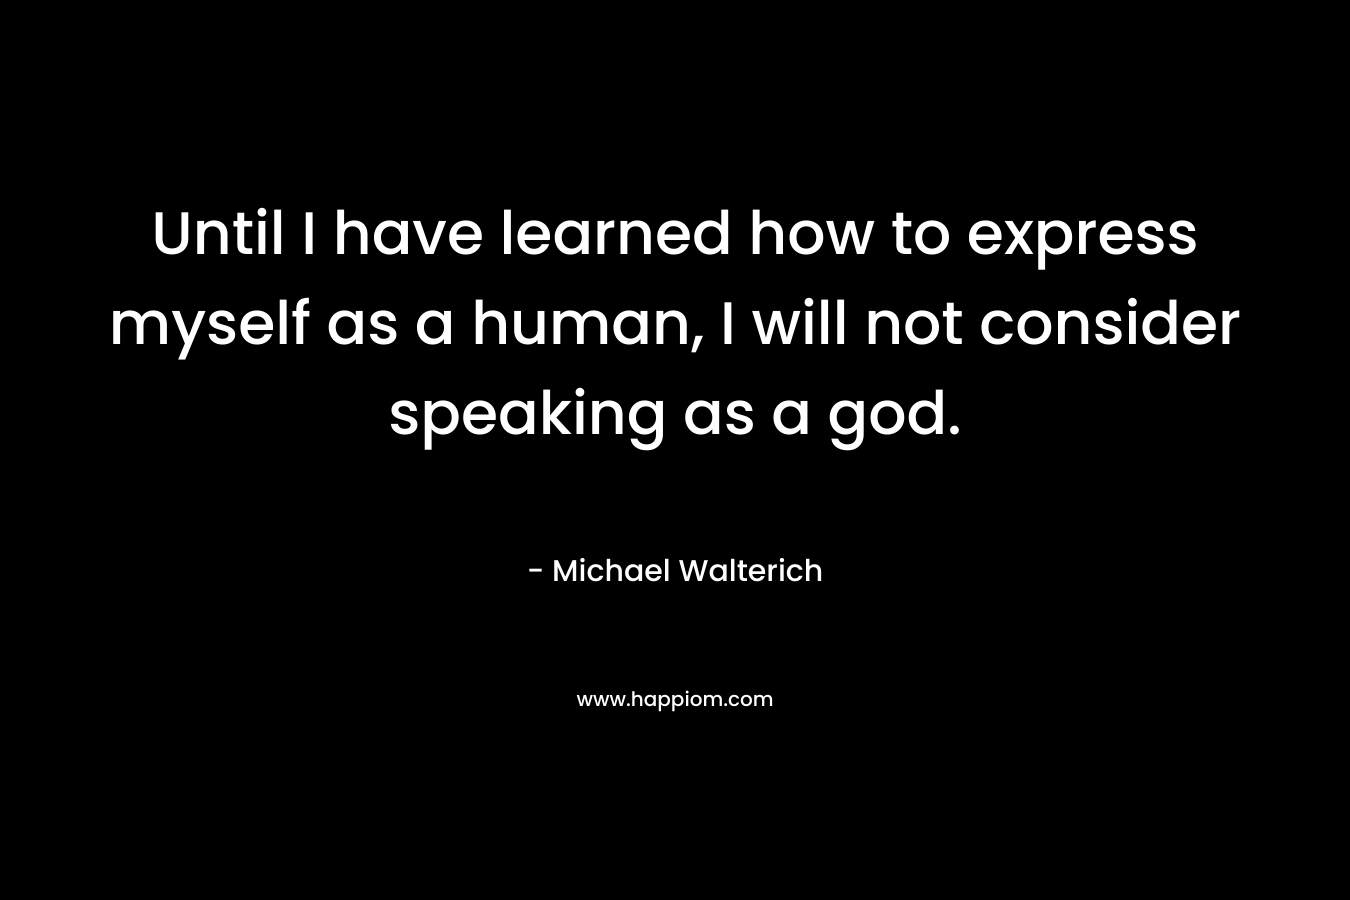 Until I have learned how to express myself as a human, I will not consider speaking as a god. – Michael Walterich